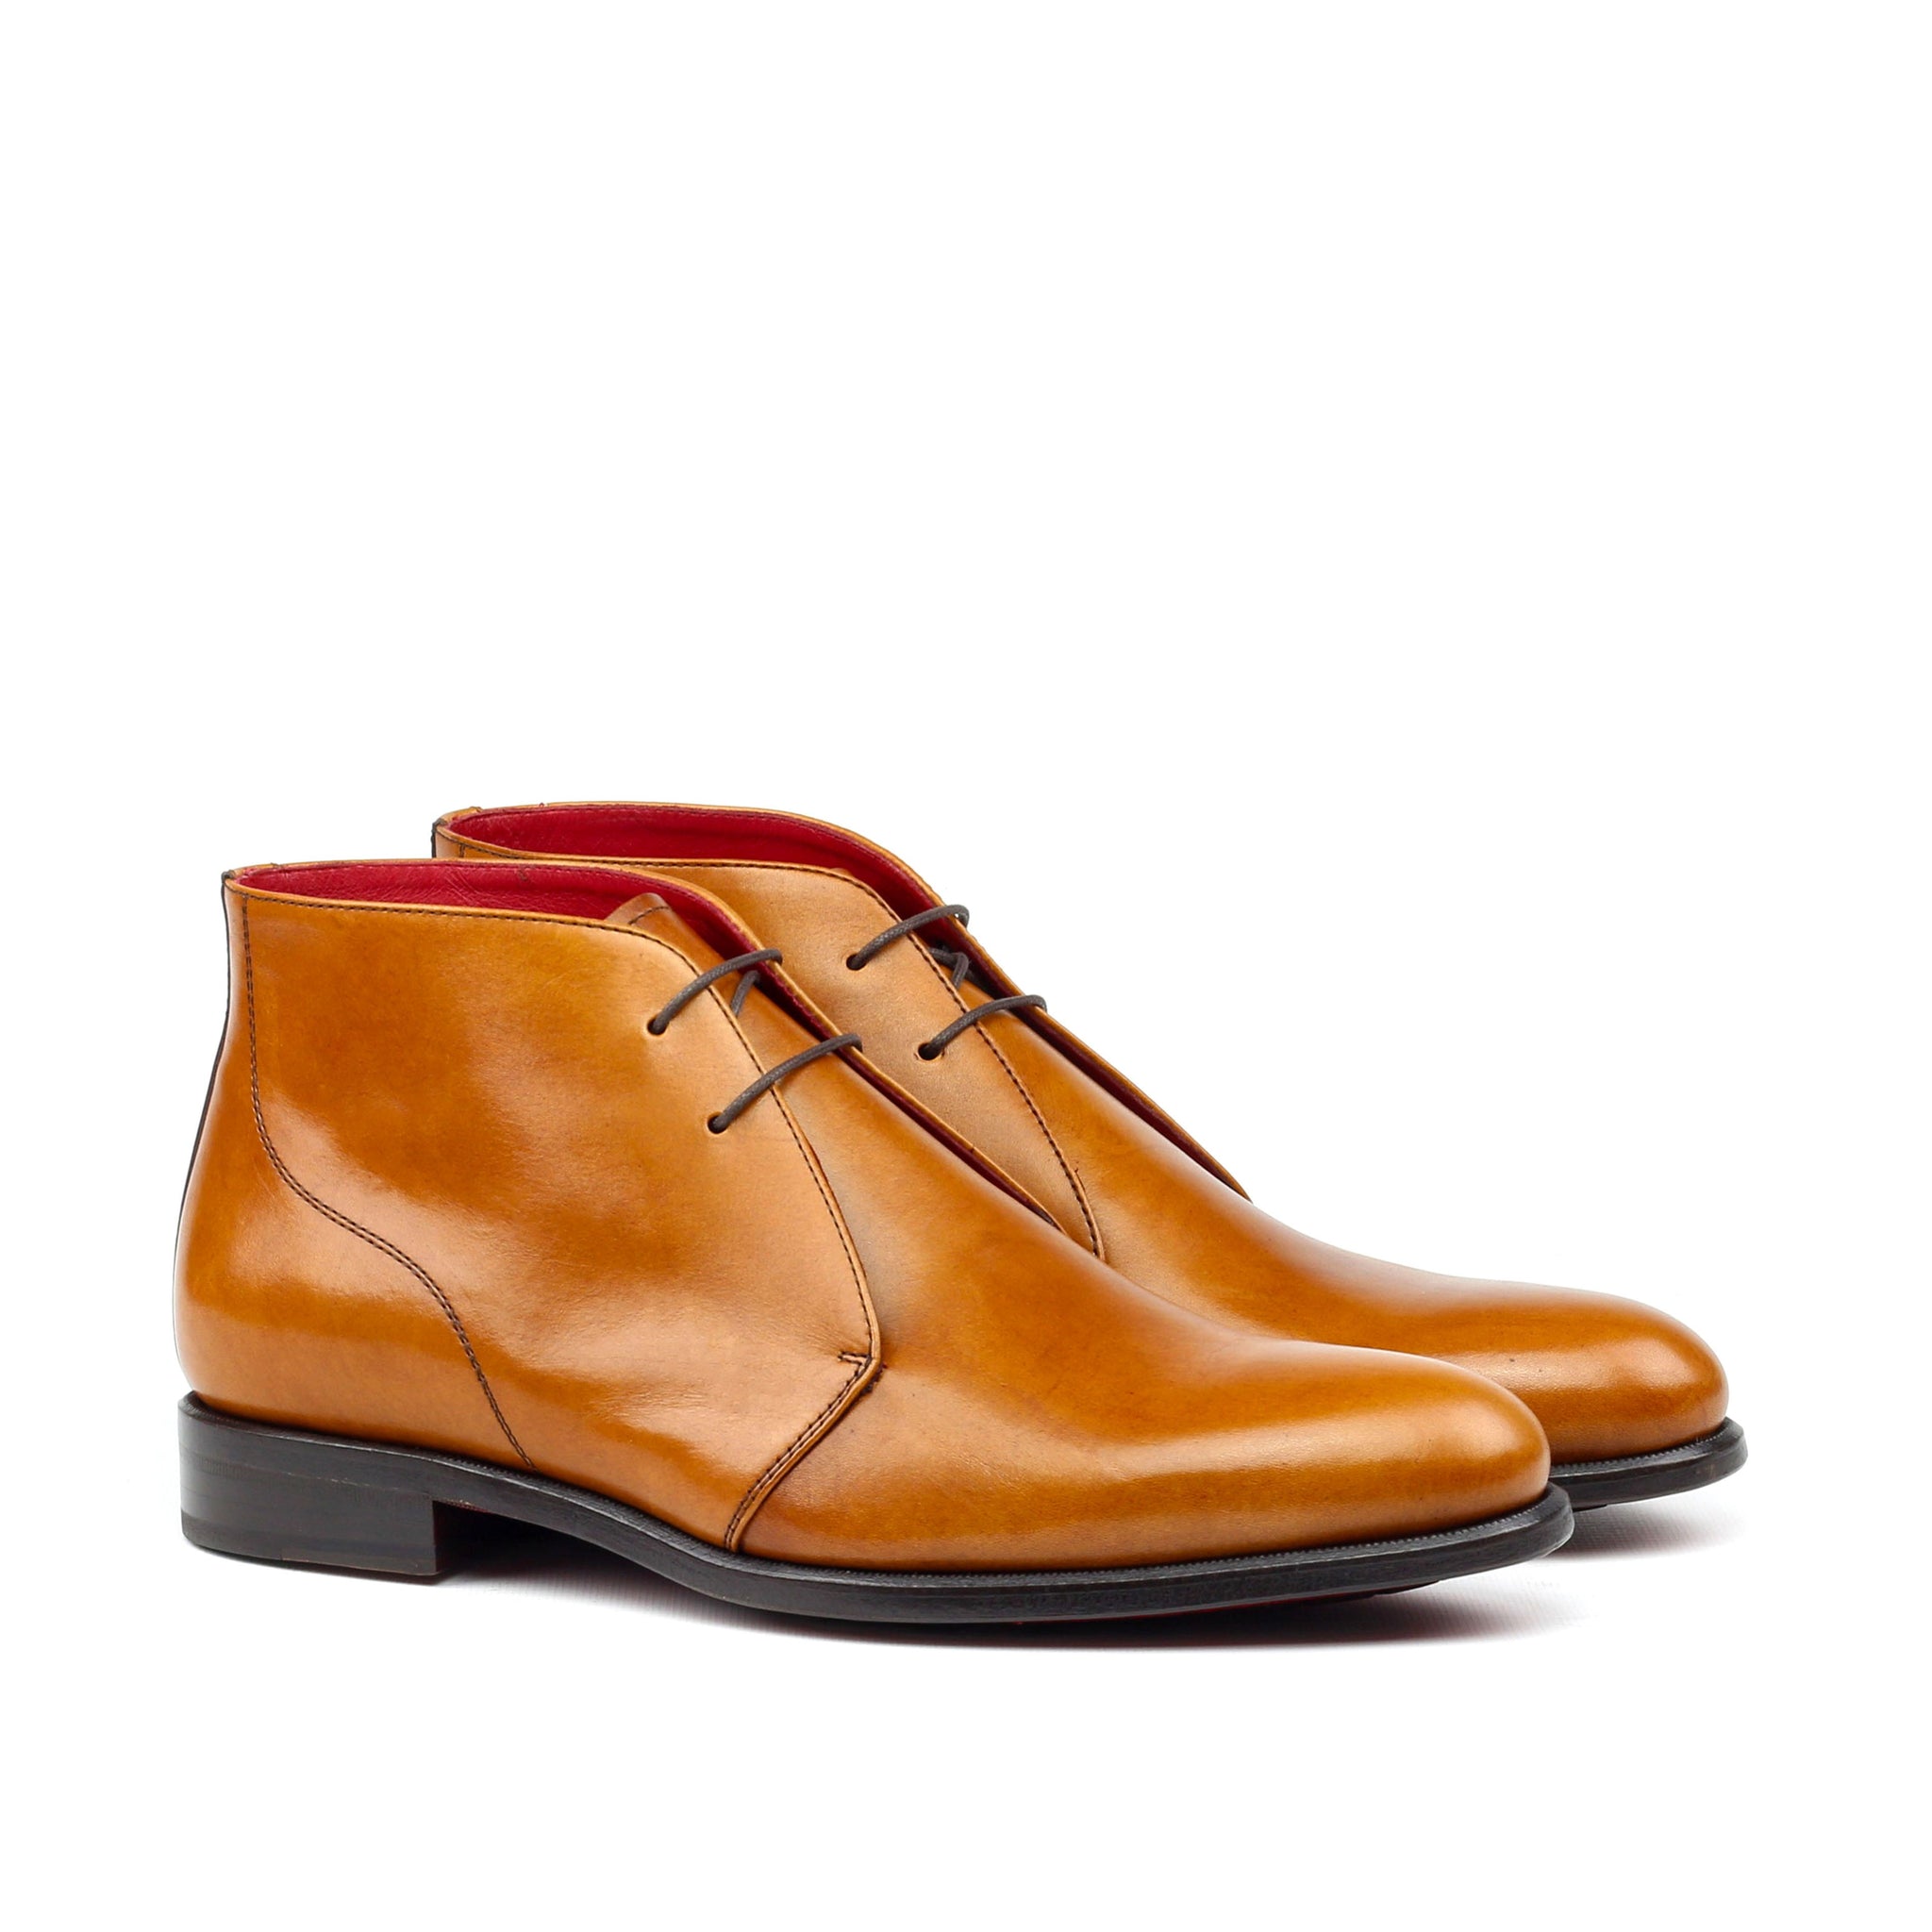 MARCUS E. - Unique Handcrafted Golden Brown Slick Polished Calf Leather Chukka Boot